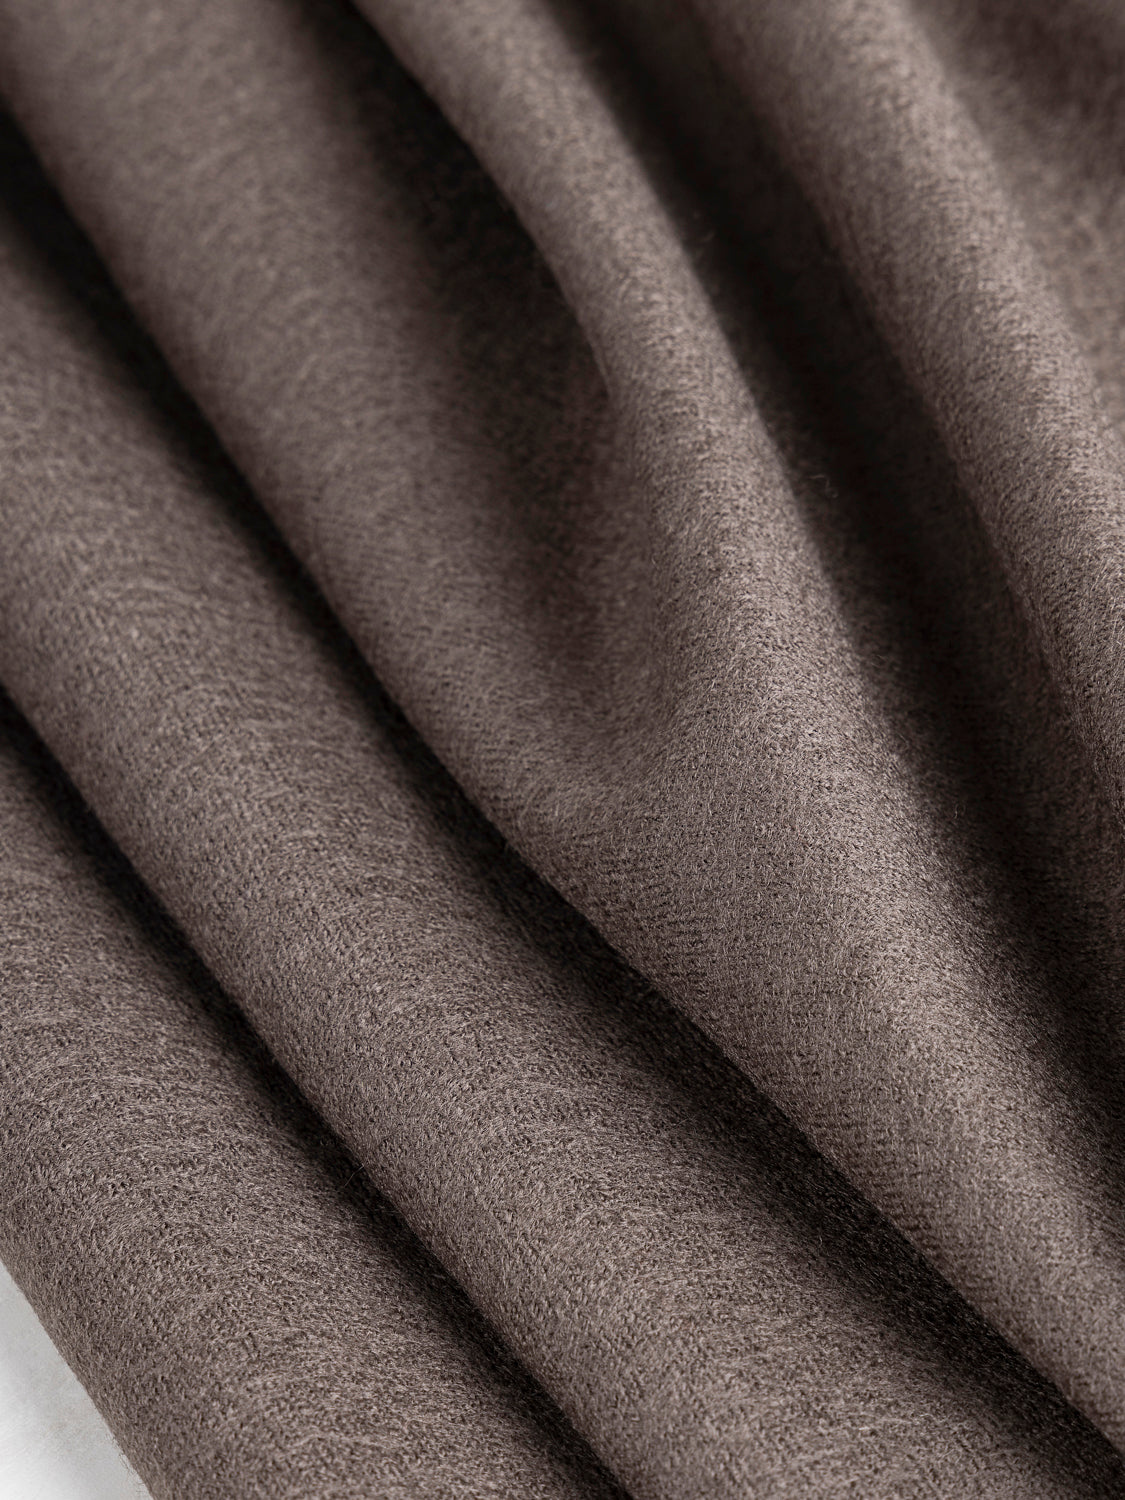 Boiled Wool Knit Deadstock - Chocolate | Core Fabrics